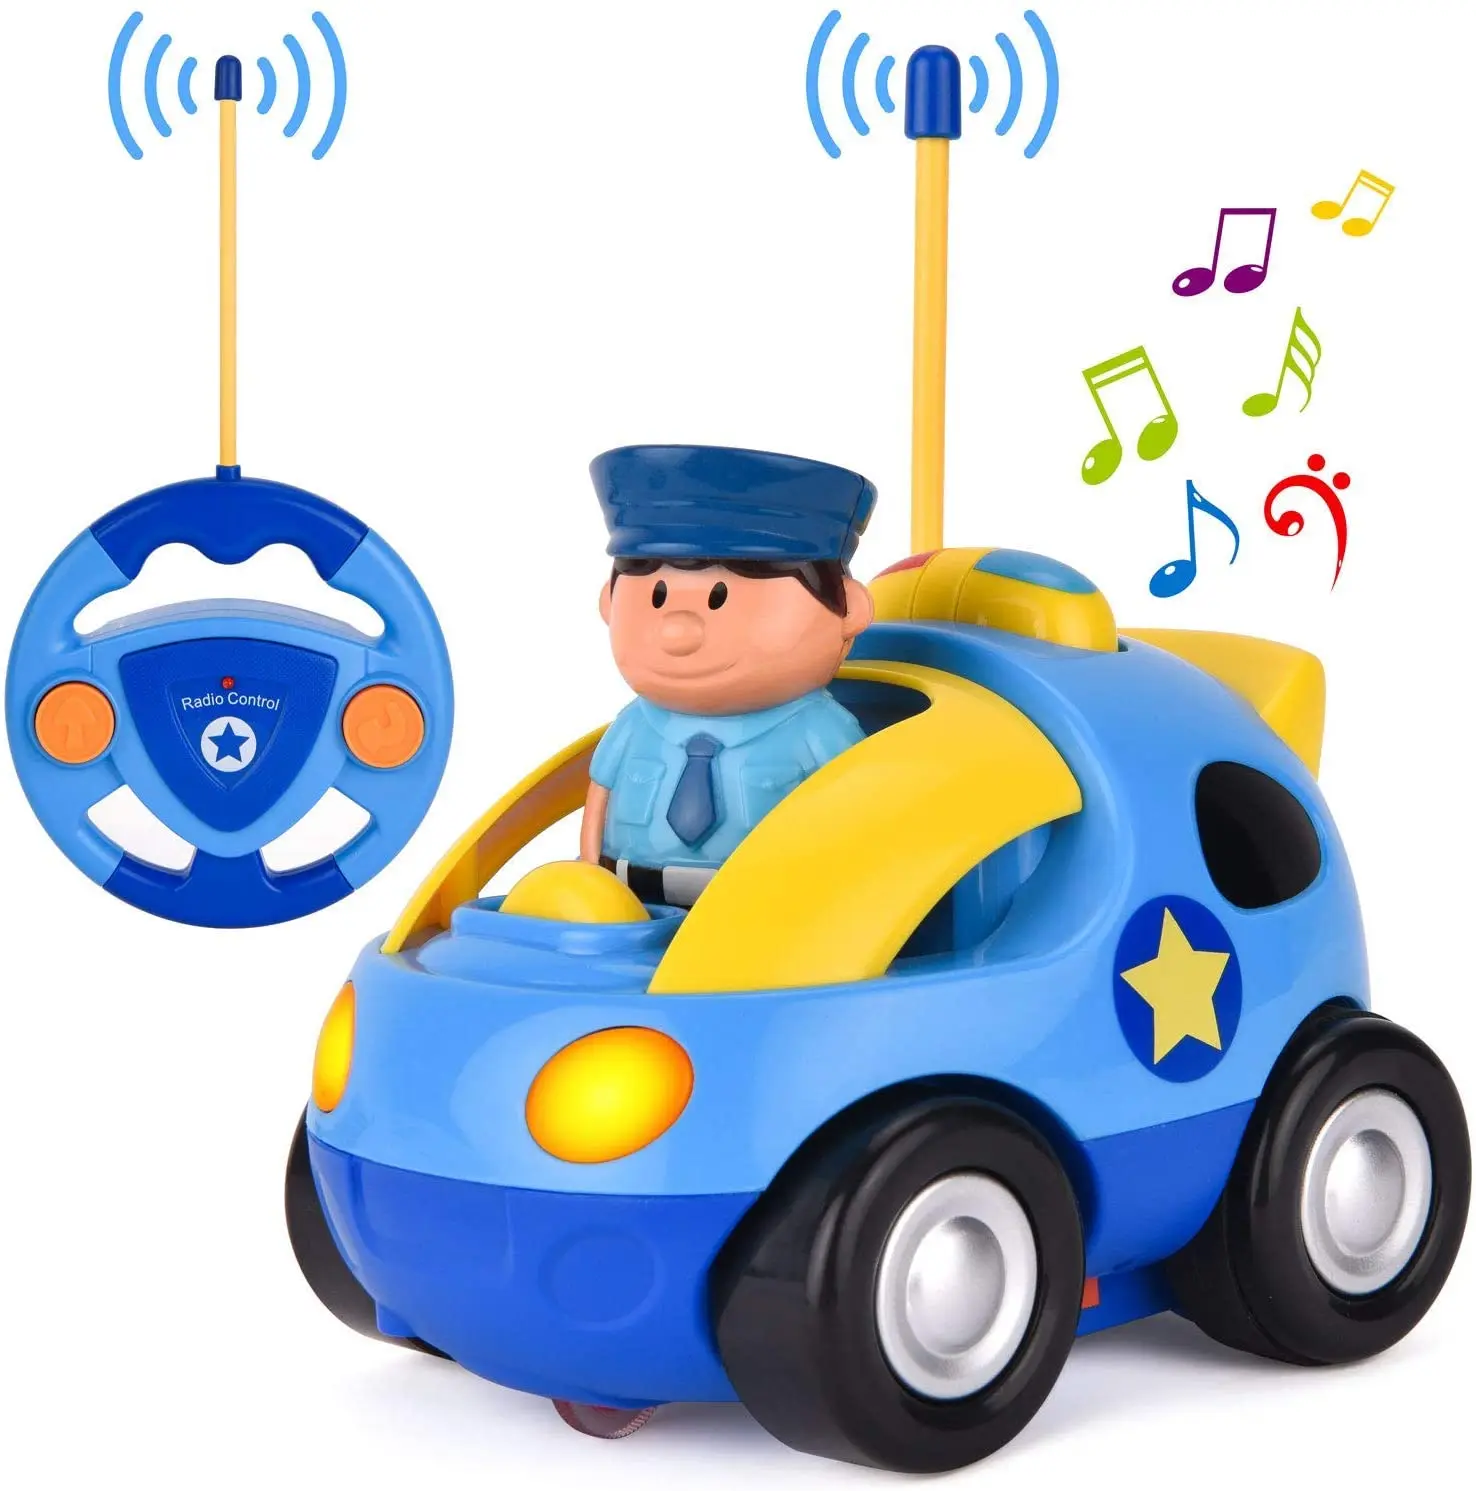 NEW Cartoon R C Race Car Radio Control Toy for Toddlers FREE SHIPPING 